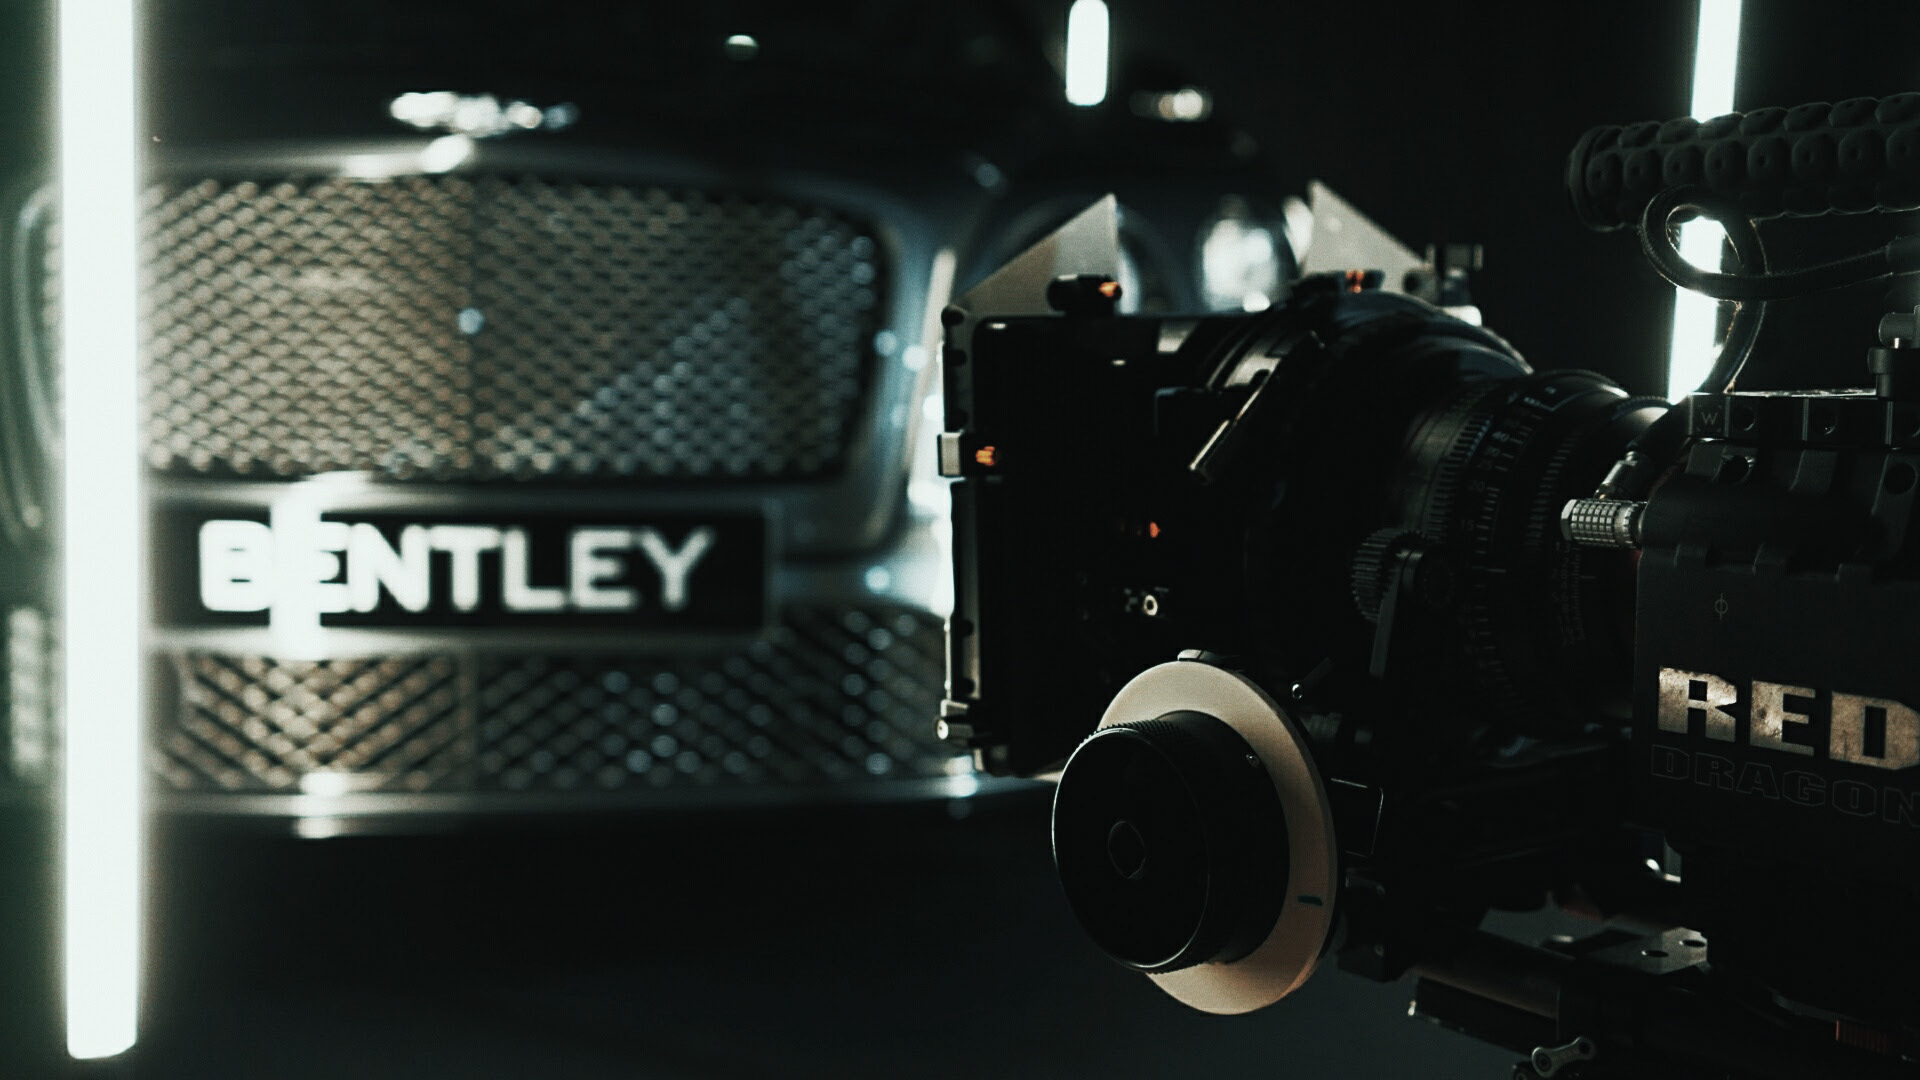 Bentley shoot with Red Epic Dragon camera equipment Red Epic-W now available for hire as well as editing and post production